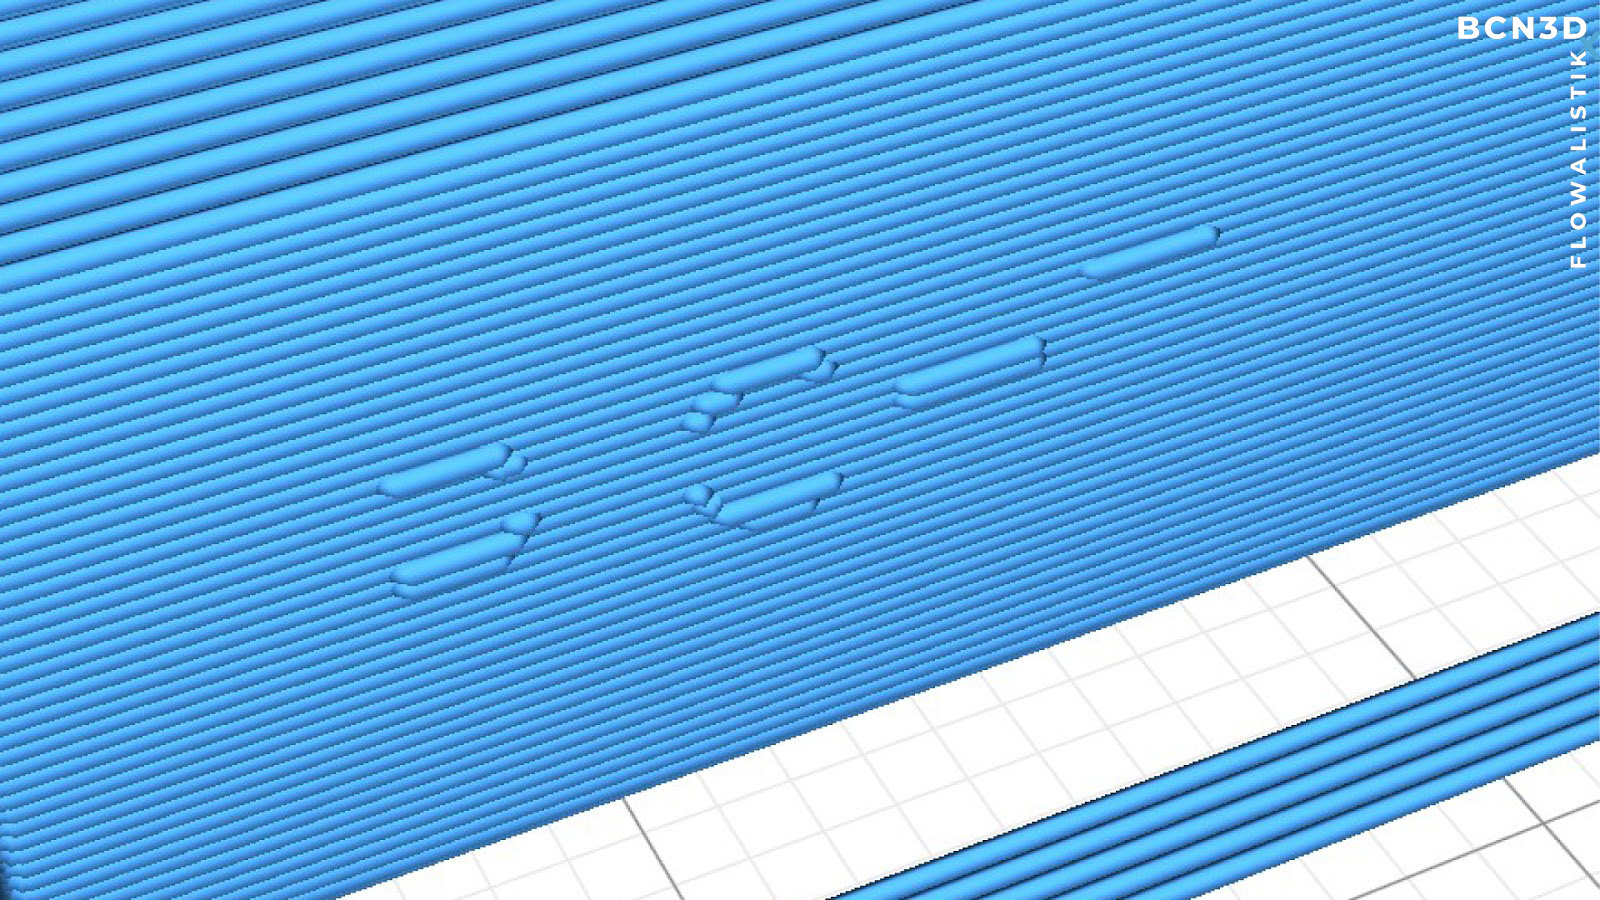 sand Ernæring Utilfreds BCN3D Slicing Guide 2: Aligning line width with your application's needs